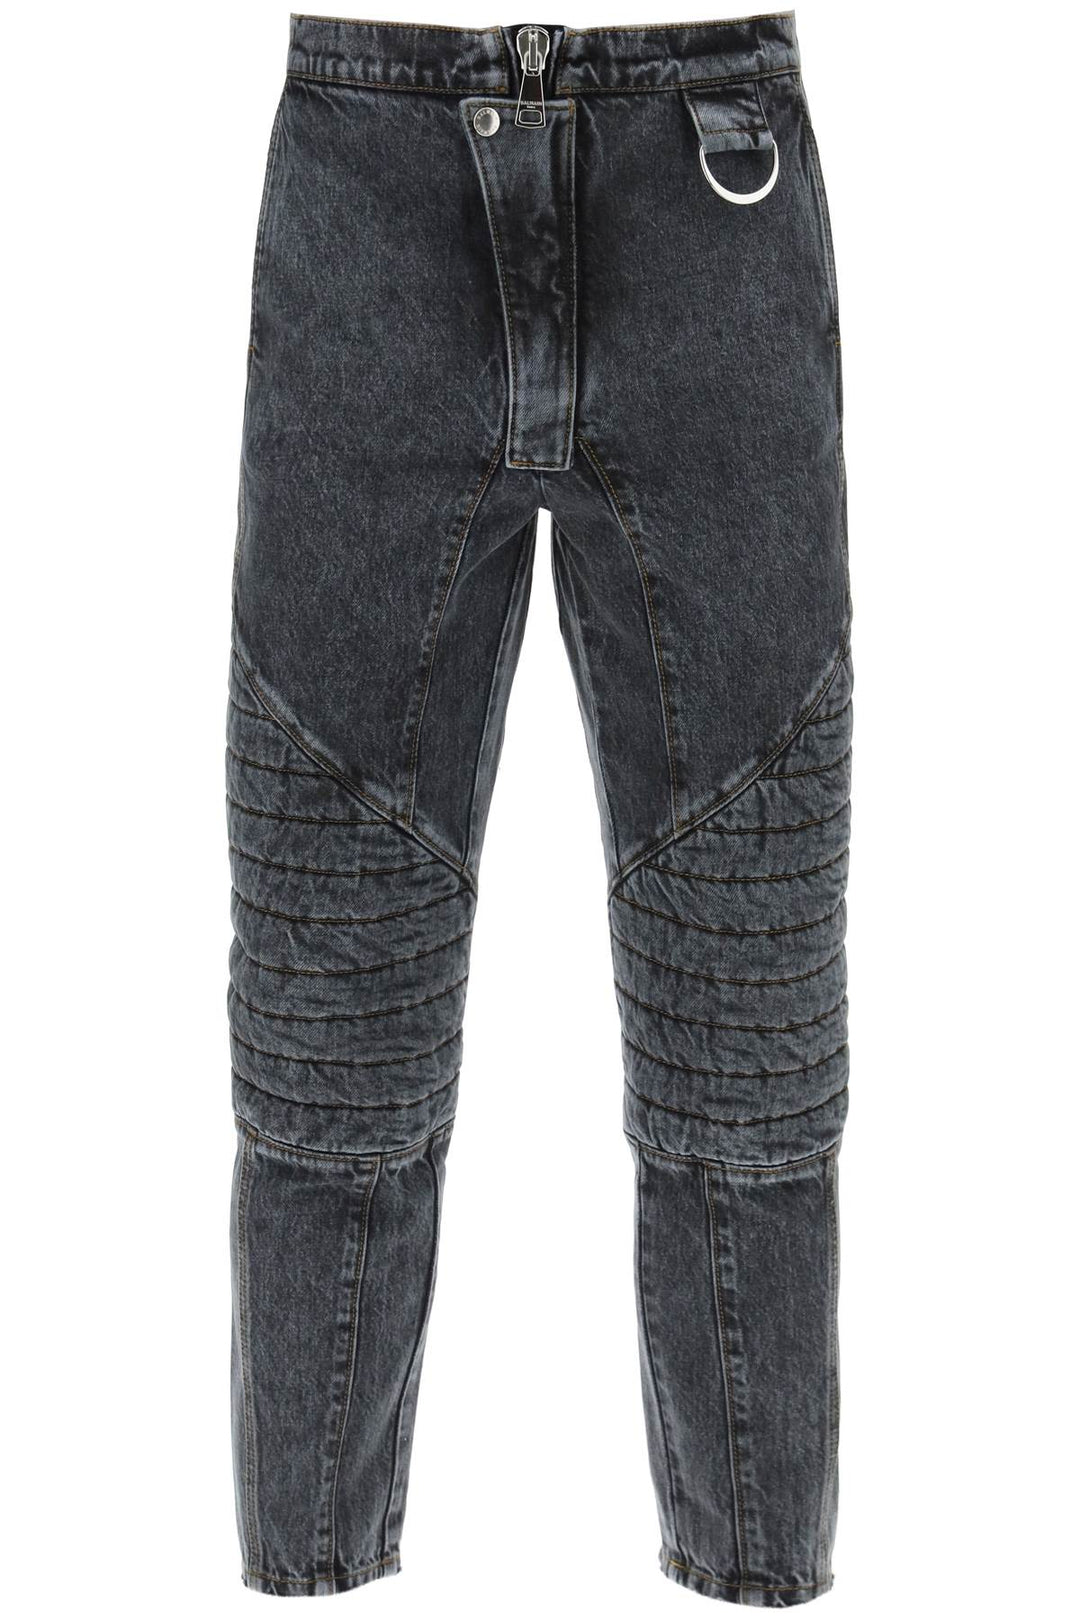 Balmain Jeans With Quilted And Padded Inserts   Grigio